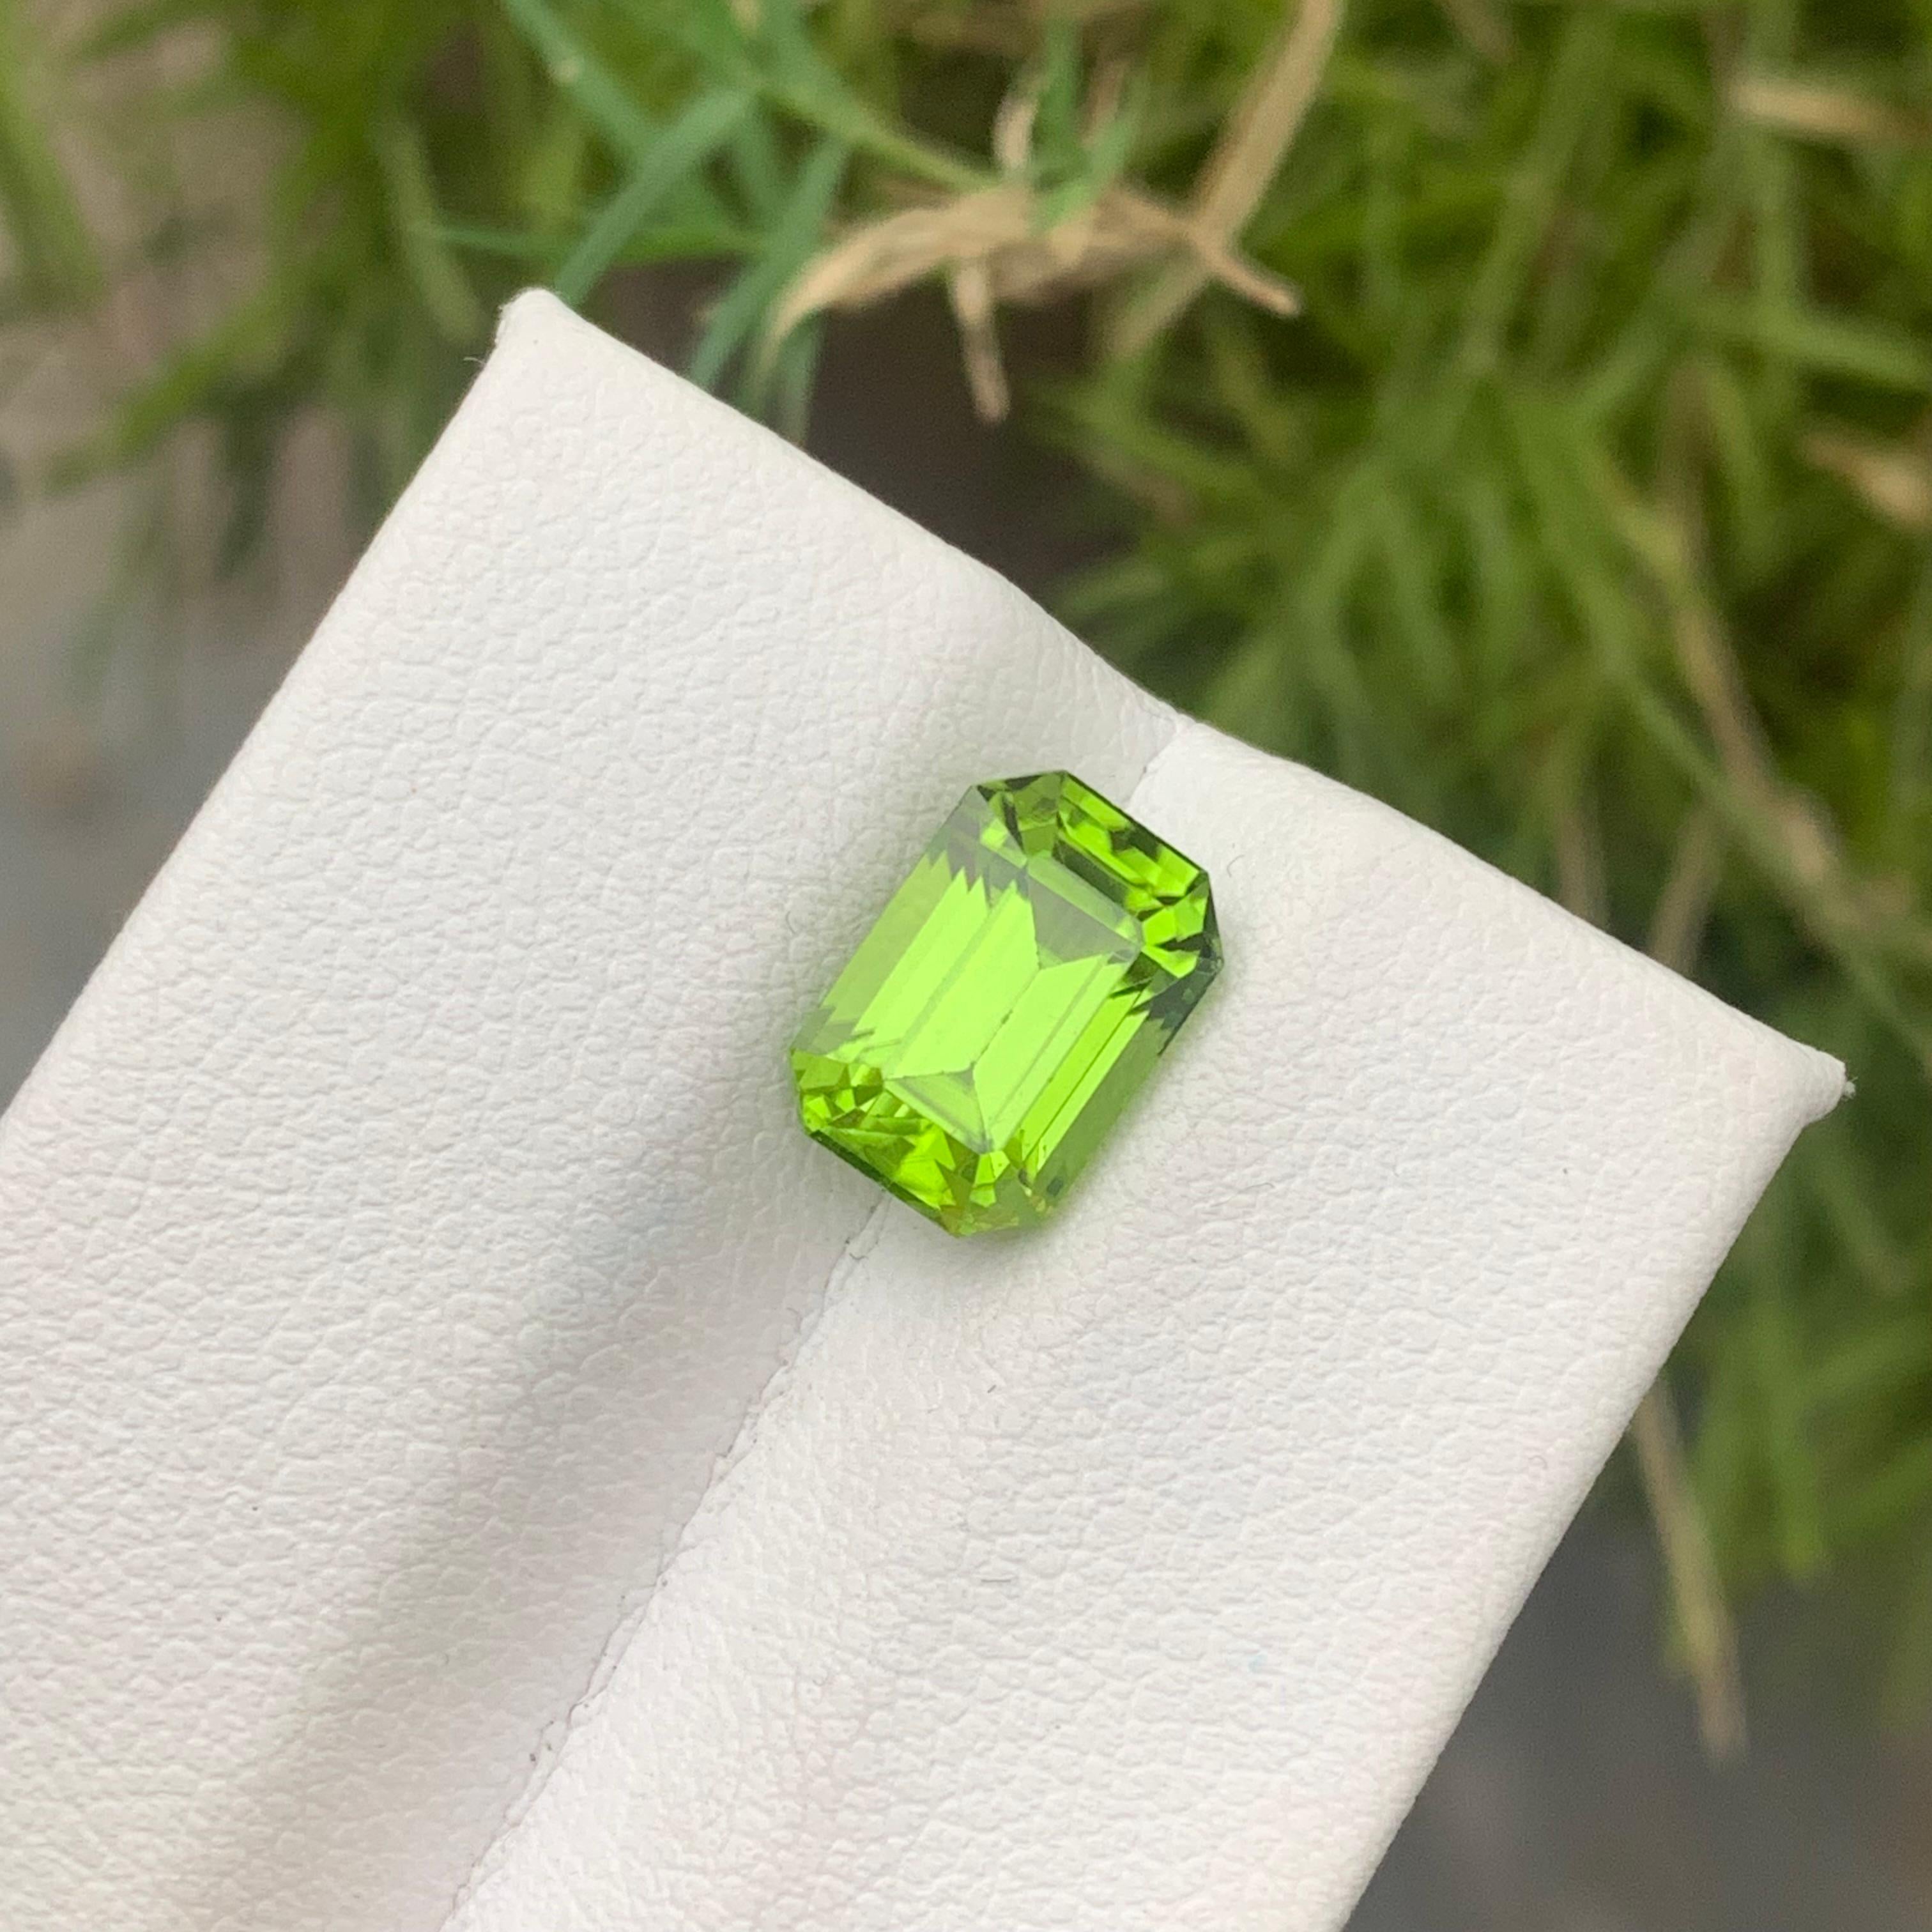 Gorgeous 3.35 Carat Natural Loose Green Peridot Gemstone from Pakistani Mine For Sale 1